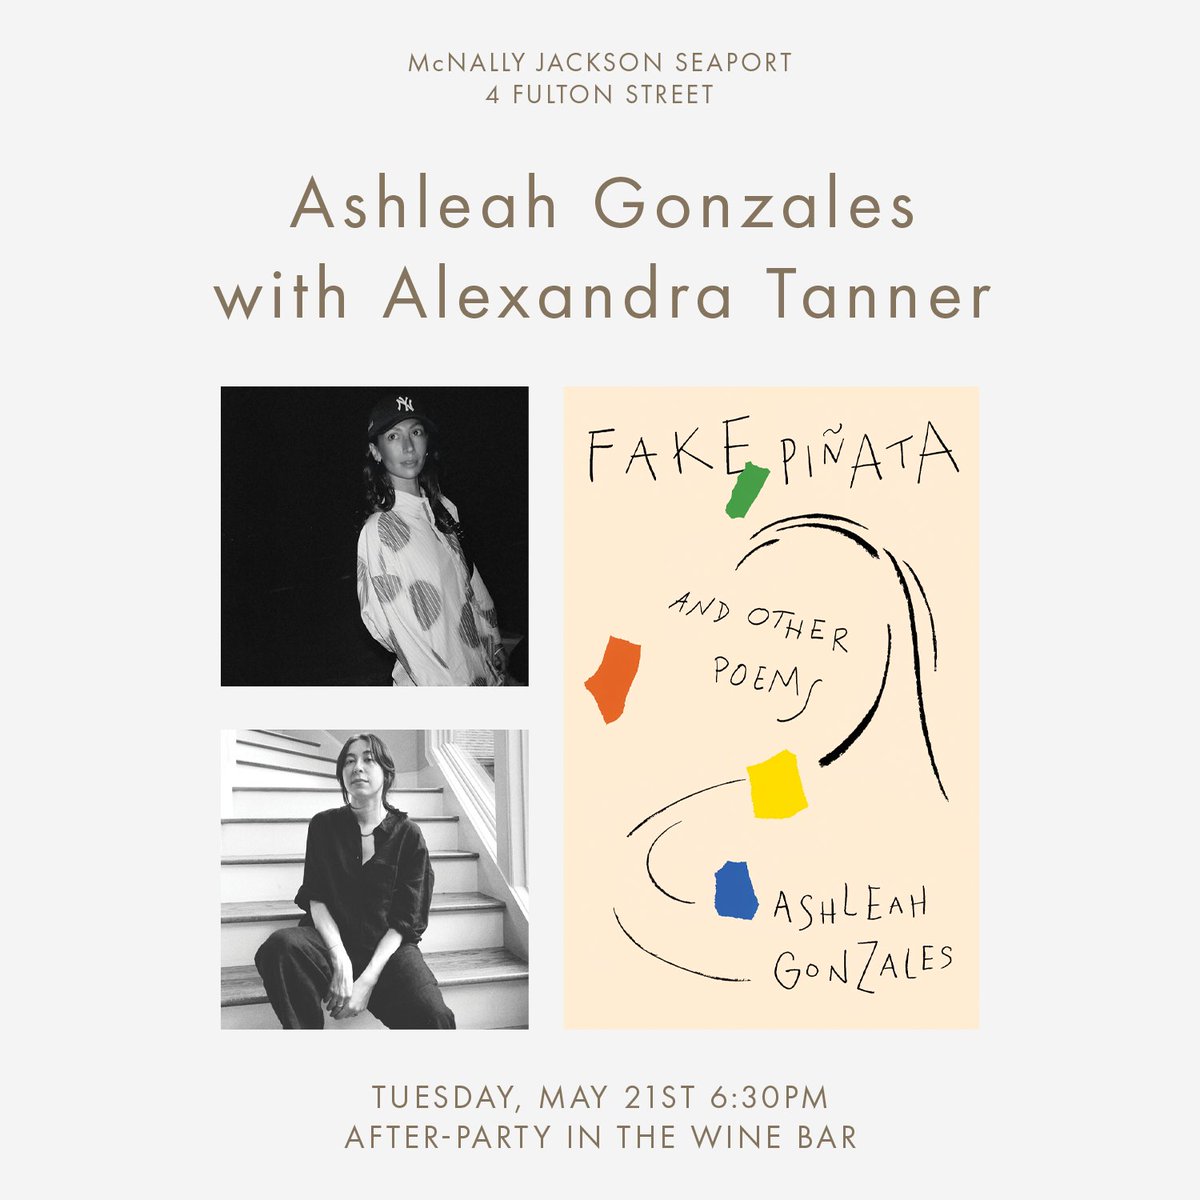 NYC launch for FAKE PIÑATA (@RoseBooks_ #003) next week! Ashleah Gonzales @slayagonzales in conversation with Alexandra Tanner @alex___tanner at @mcnallyjackson Seaport Tuesday, May 21 at 6:30PM RSVP here: mcnallyjackson.com/event/ashleah-…